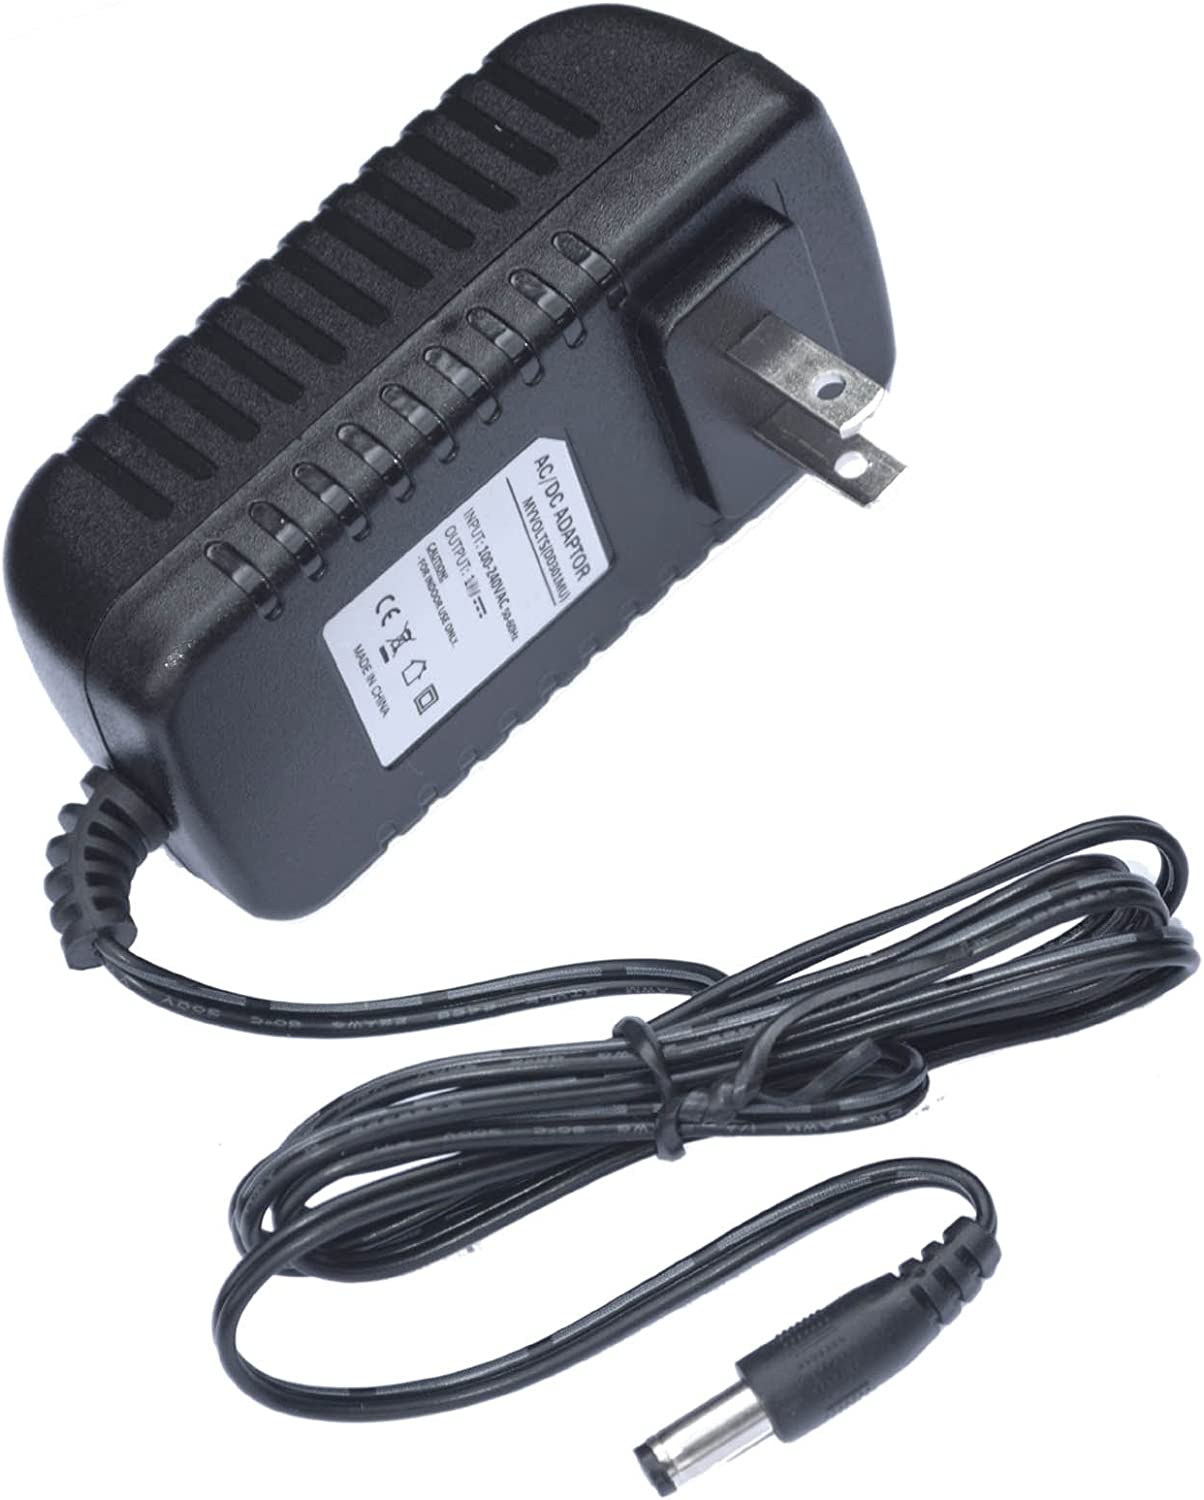 US 18V Power Adaptor for The Black and Decker CDC1800 Drill Charger by myVolts